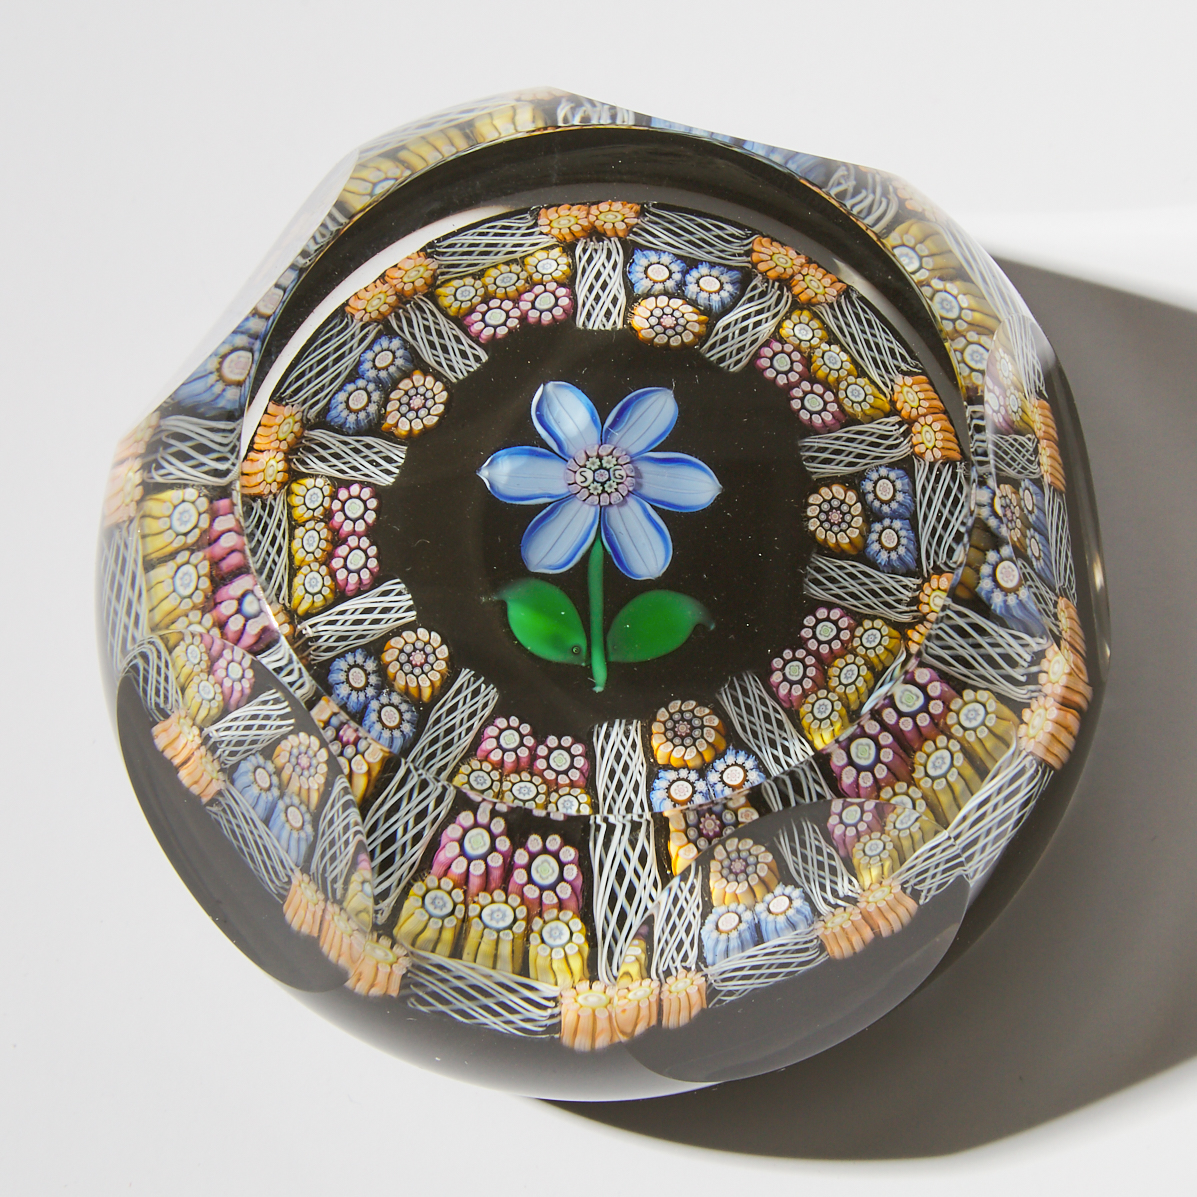 Perthshire Facetted Millefiori and Flower Glass Paperweight, for The Stone Gallery, c.1999